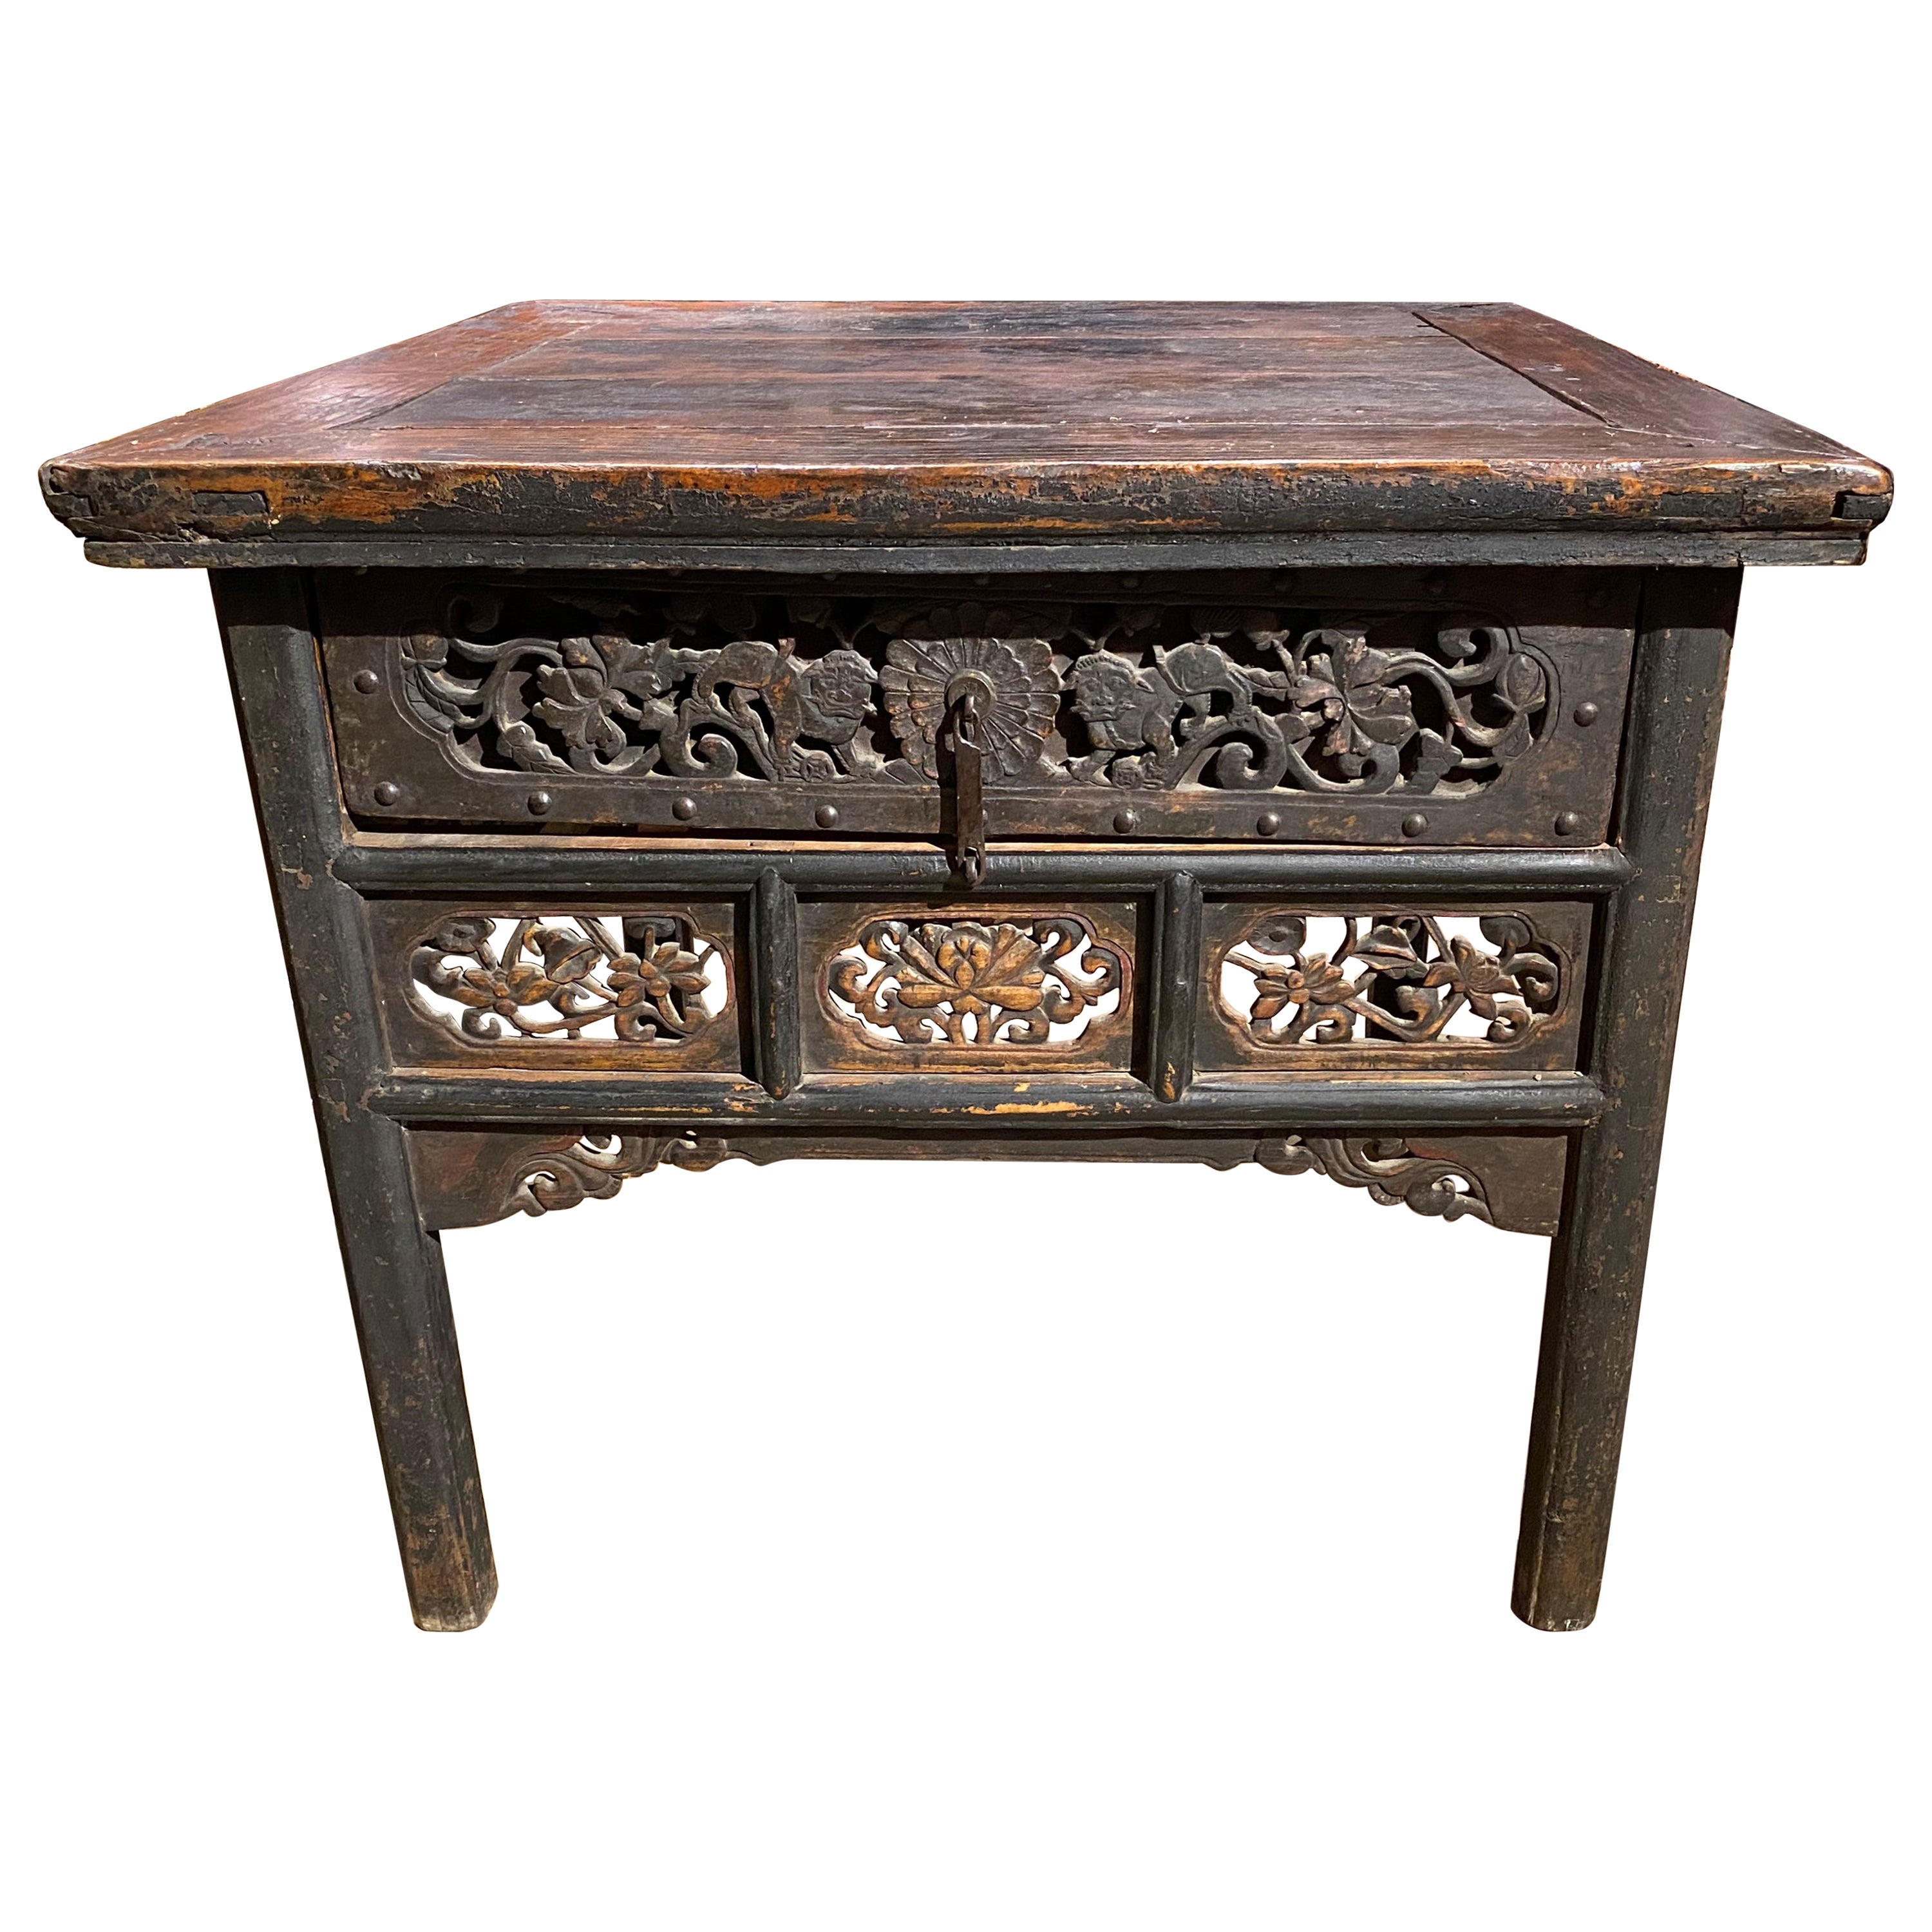 19th Century Chinese Heavily Carved Hardwood Center Table